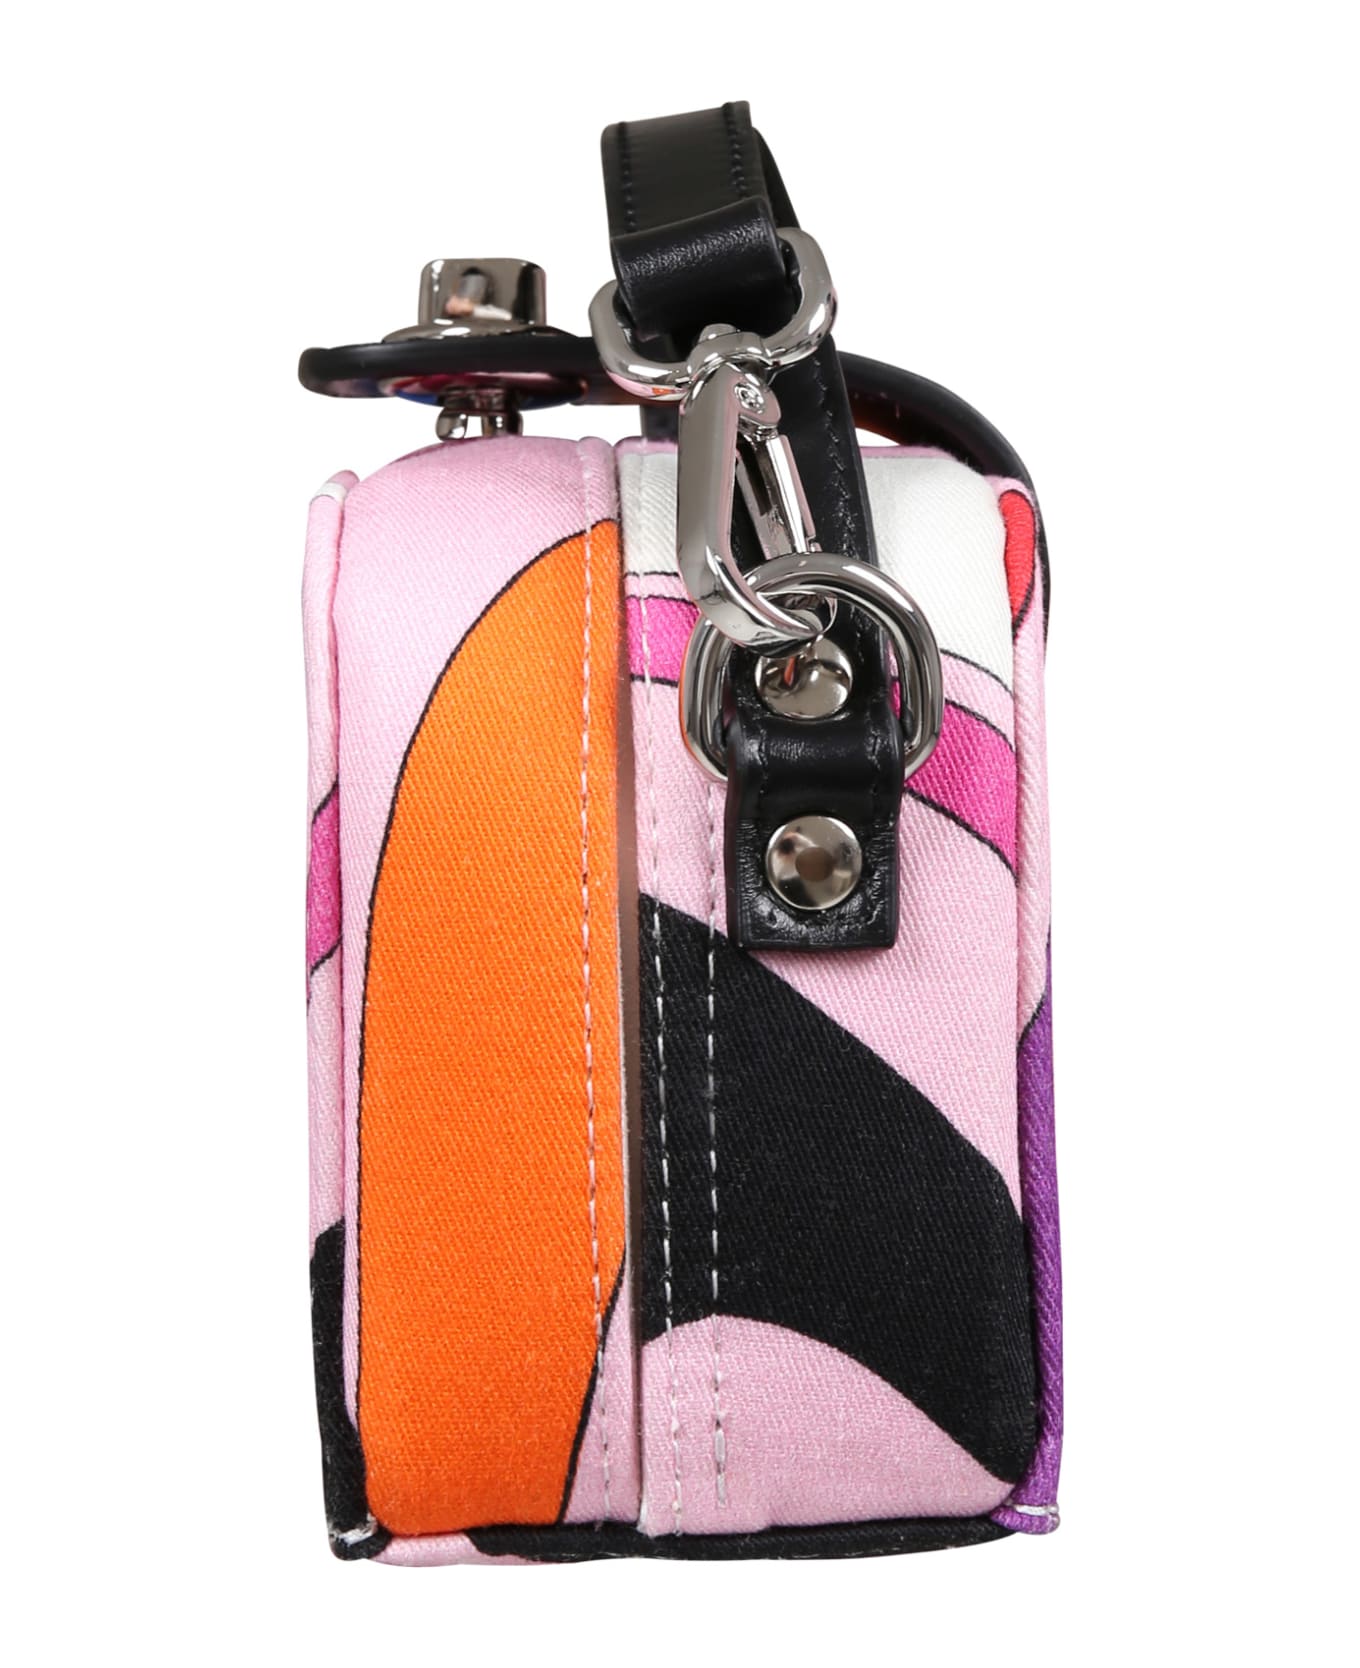 Pucci Multicolor Bag For Girl - Multicolor アクセサリー＆ギフト